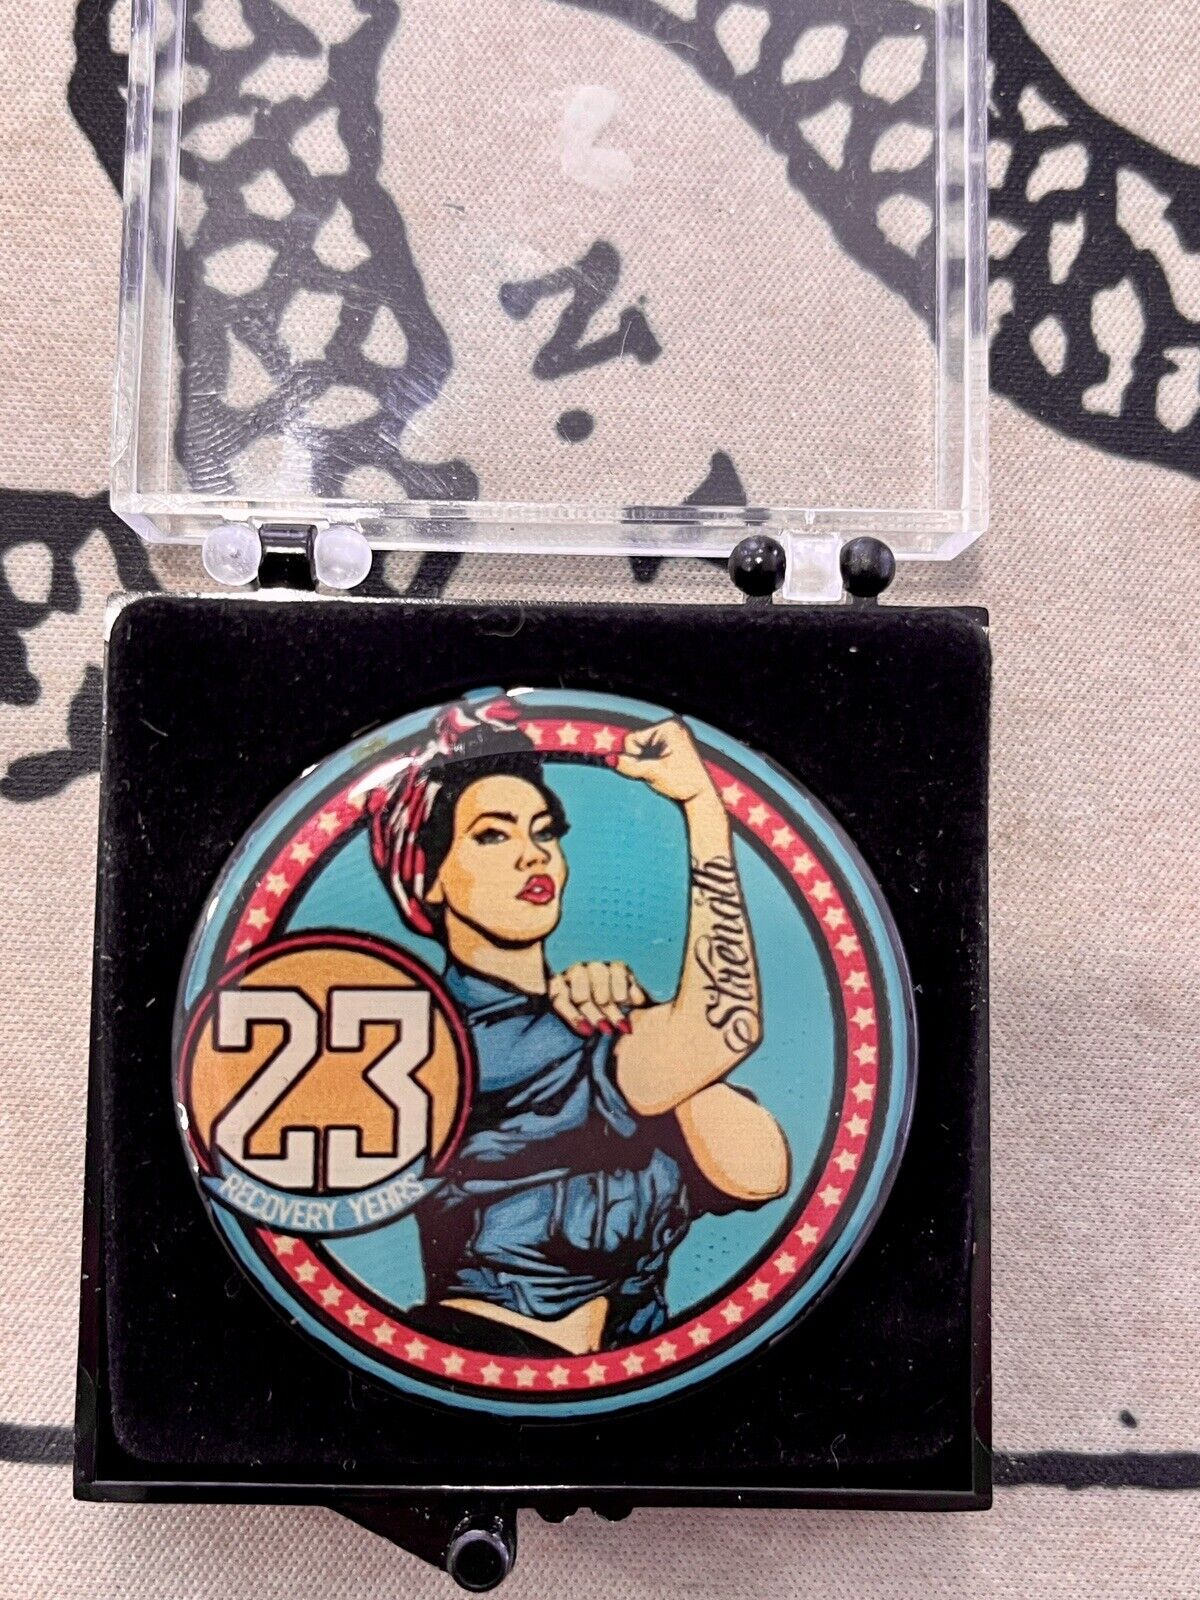 23 Year Sobriety Coin Rosey The Riveter.Beautiful Gift For Yourself Or Loved One